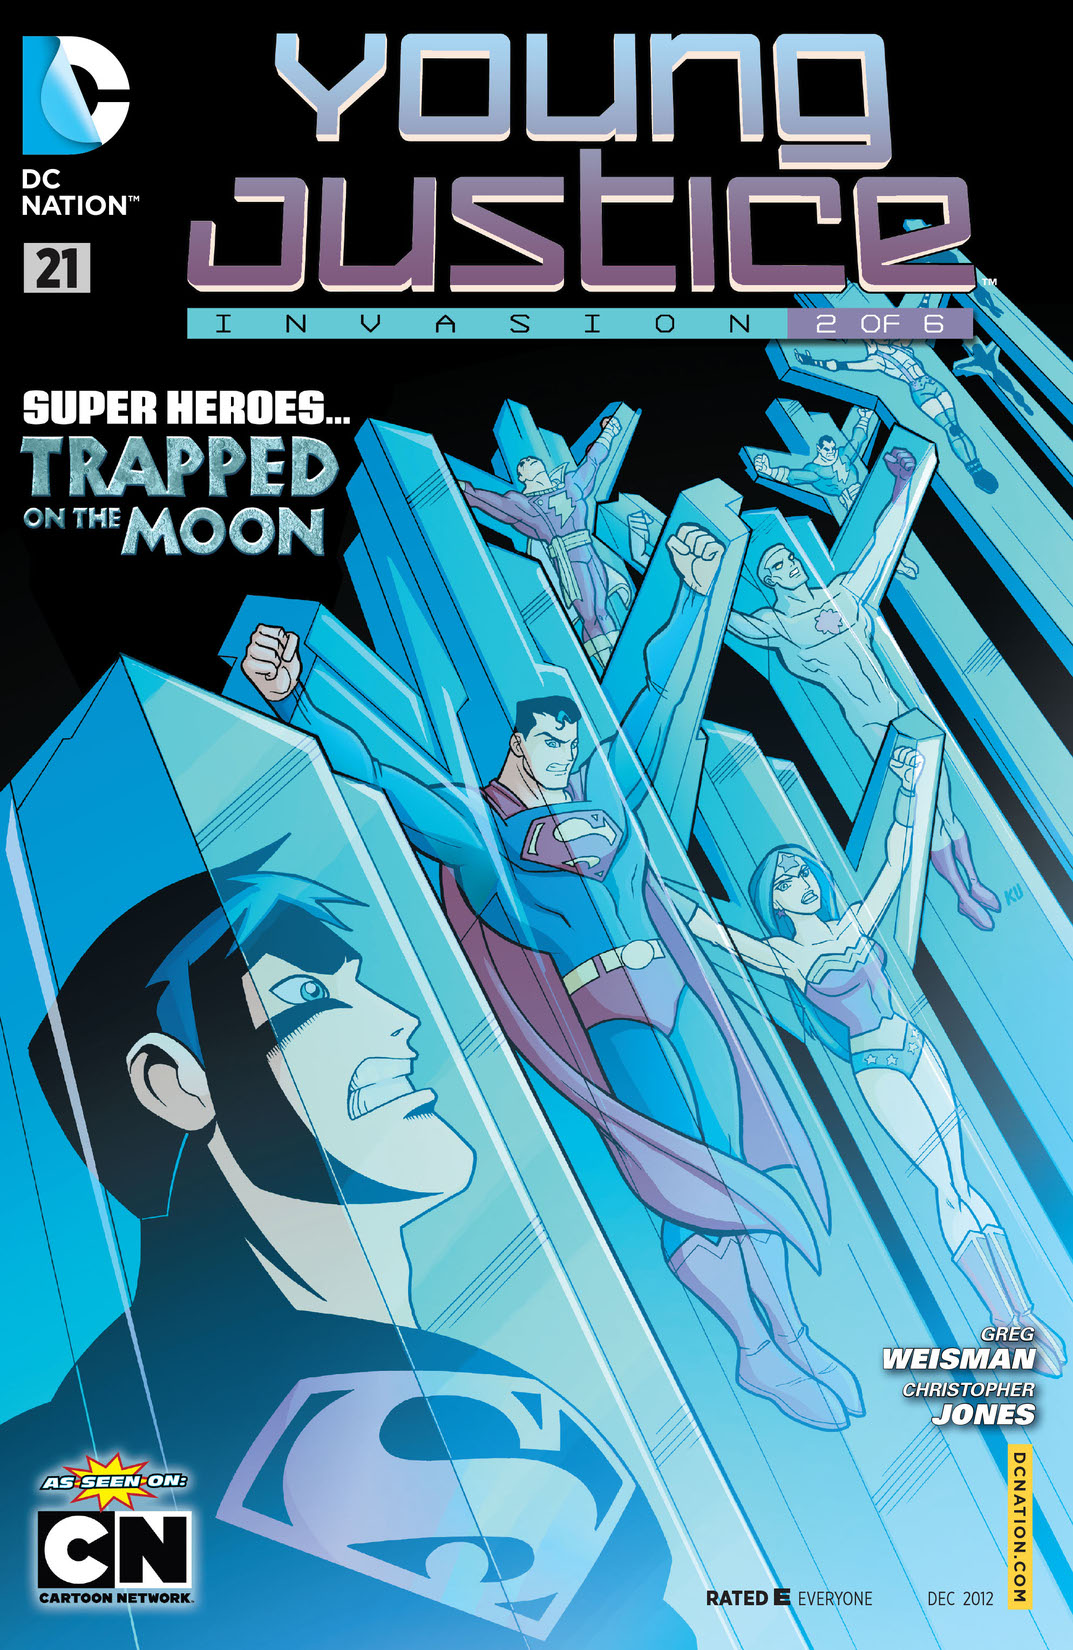 Young Justice (2011-2013) #21 preview images